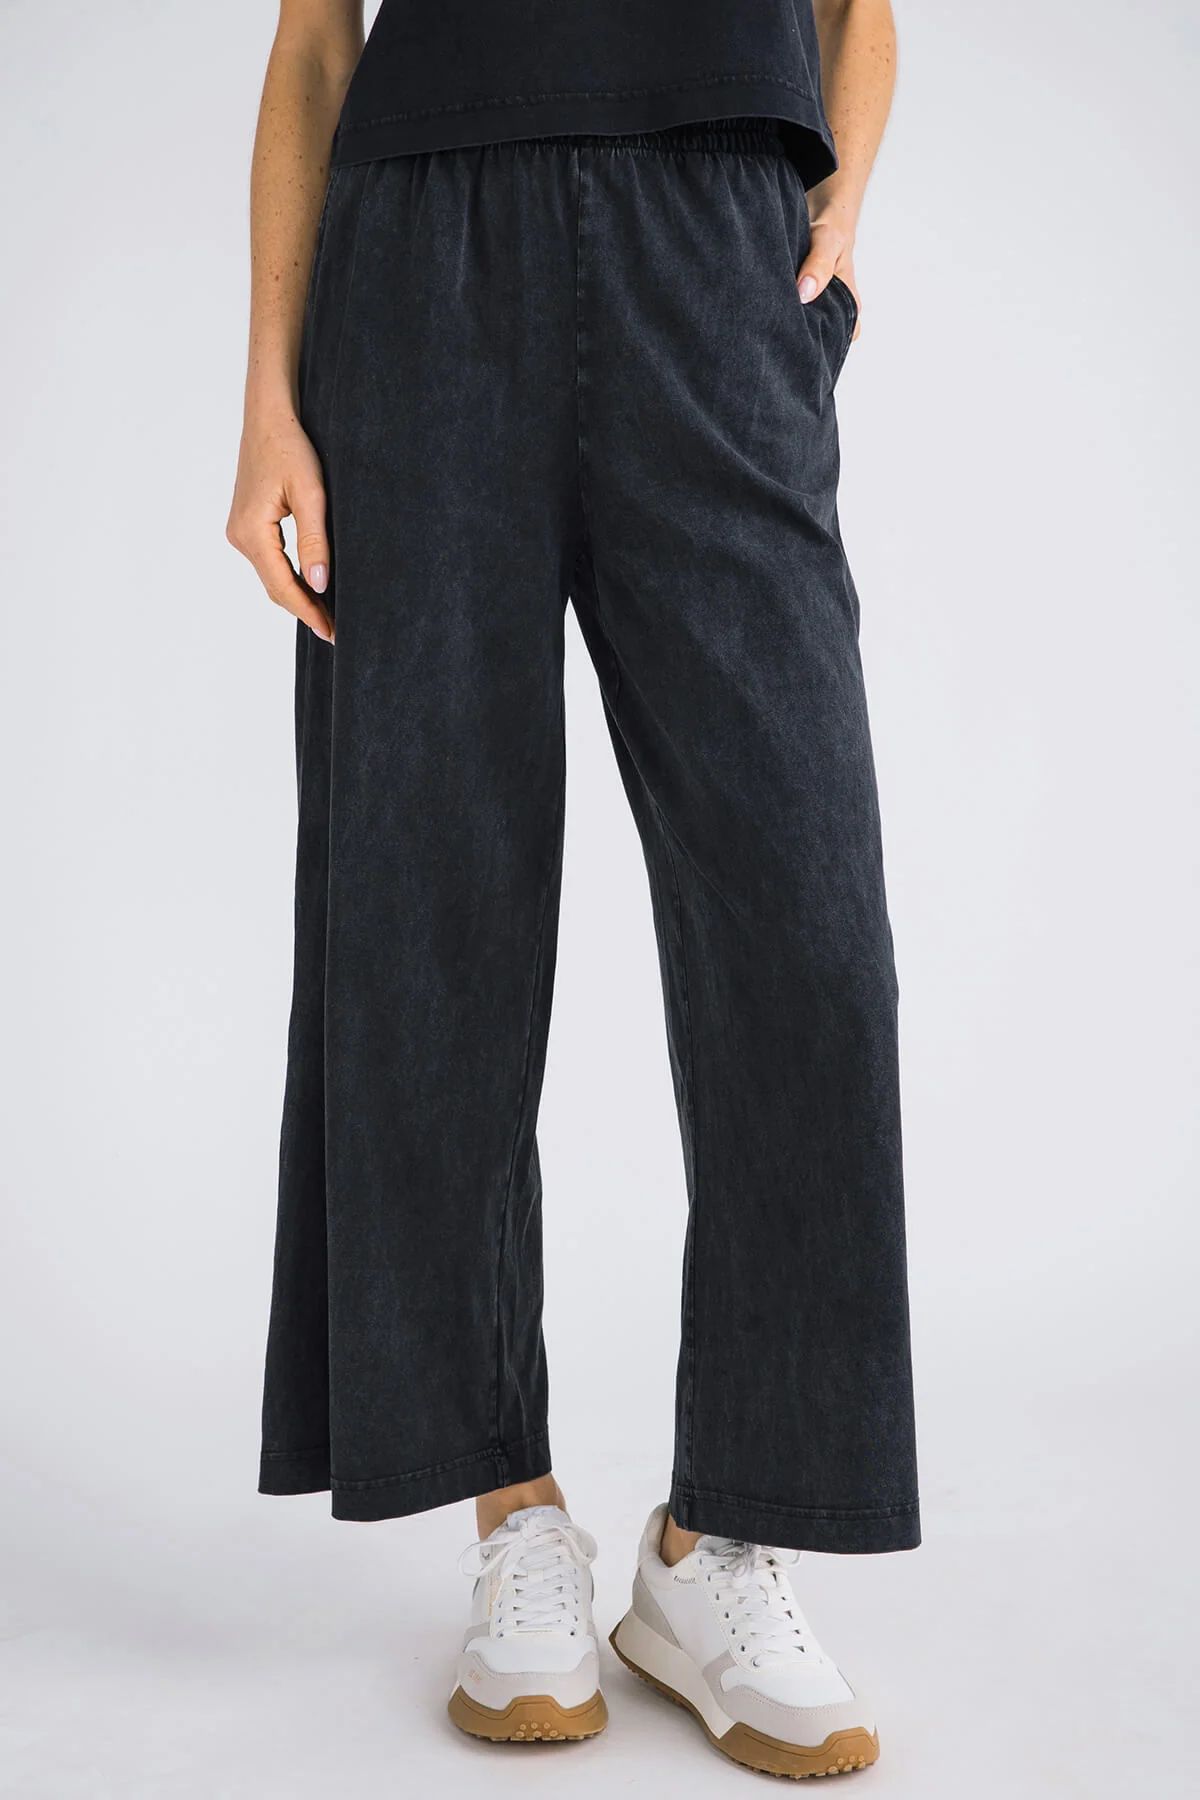 Z Supply Scout Jersey Flare Pocket Pant | Social Threads